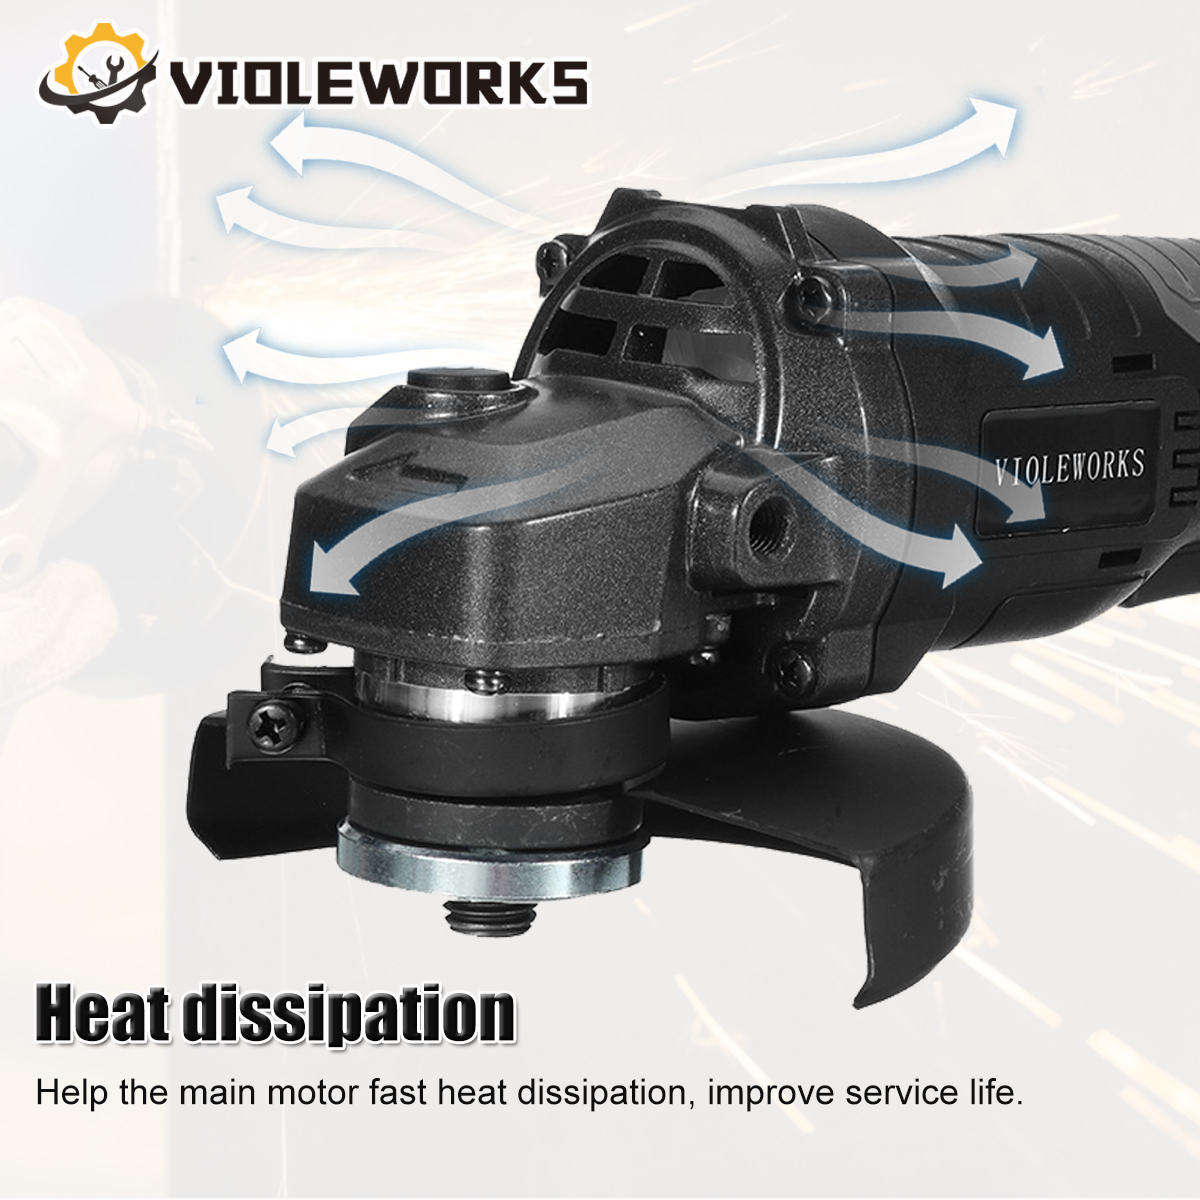 VIOLEWORKS-288VF-125mm-Cordless-Angle-Grinder-3-Gears-Brushless-Electric-Metal-Stone-Wood-Cutting-Po-1839464-3